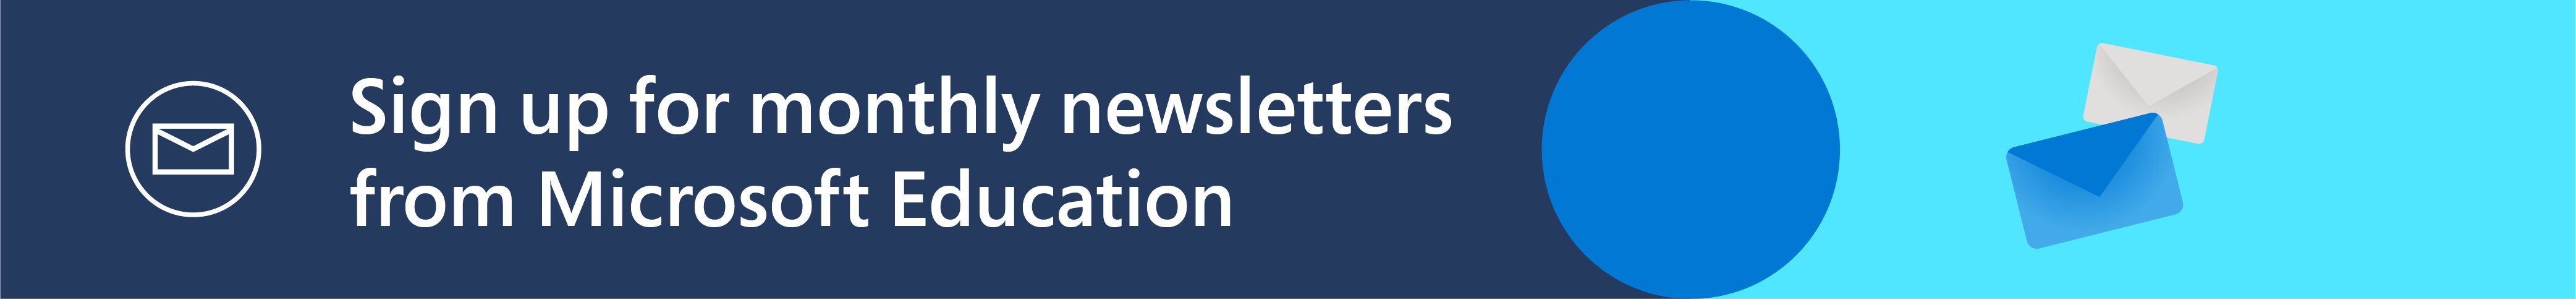 Sign up for Microsoft Education Newsletters 